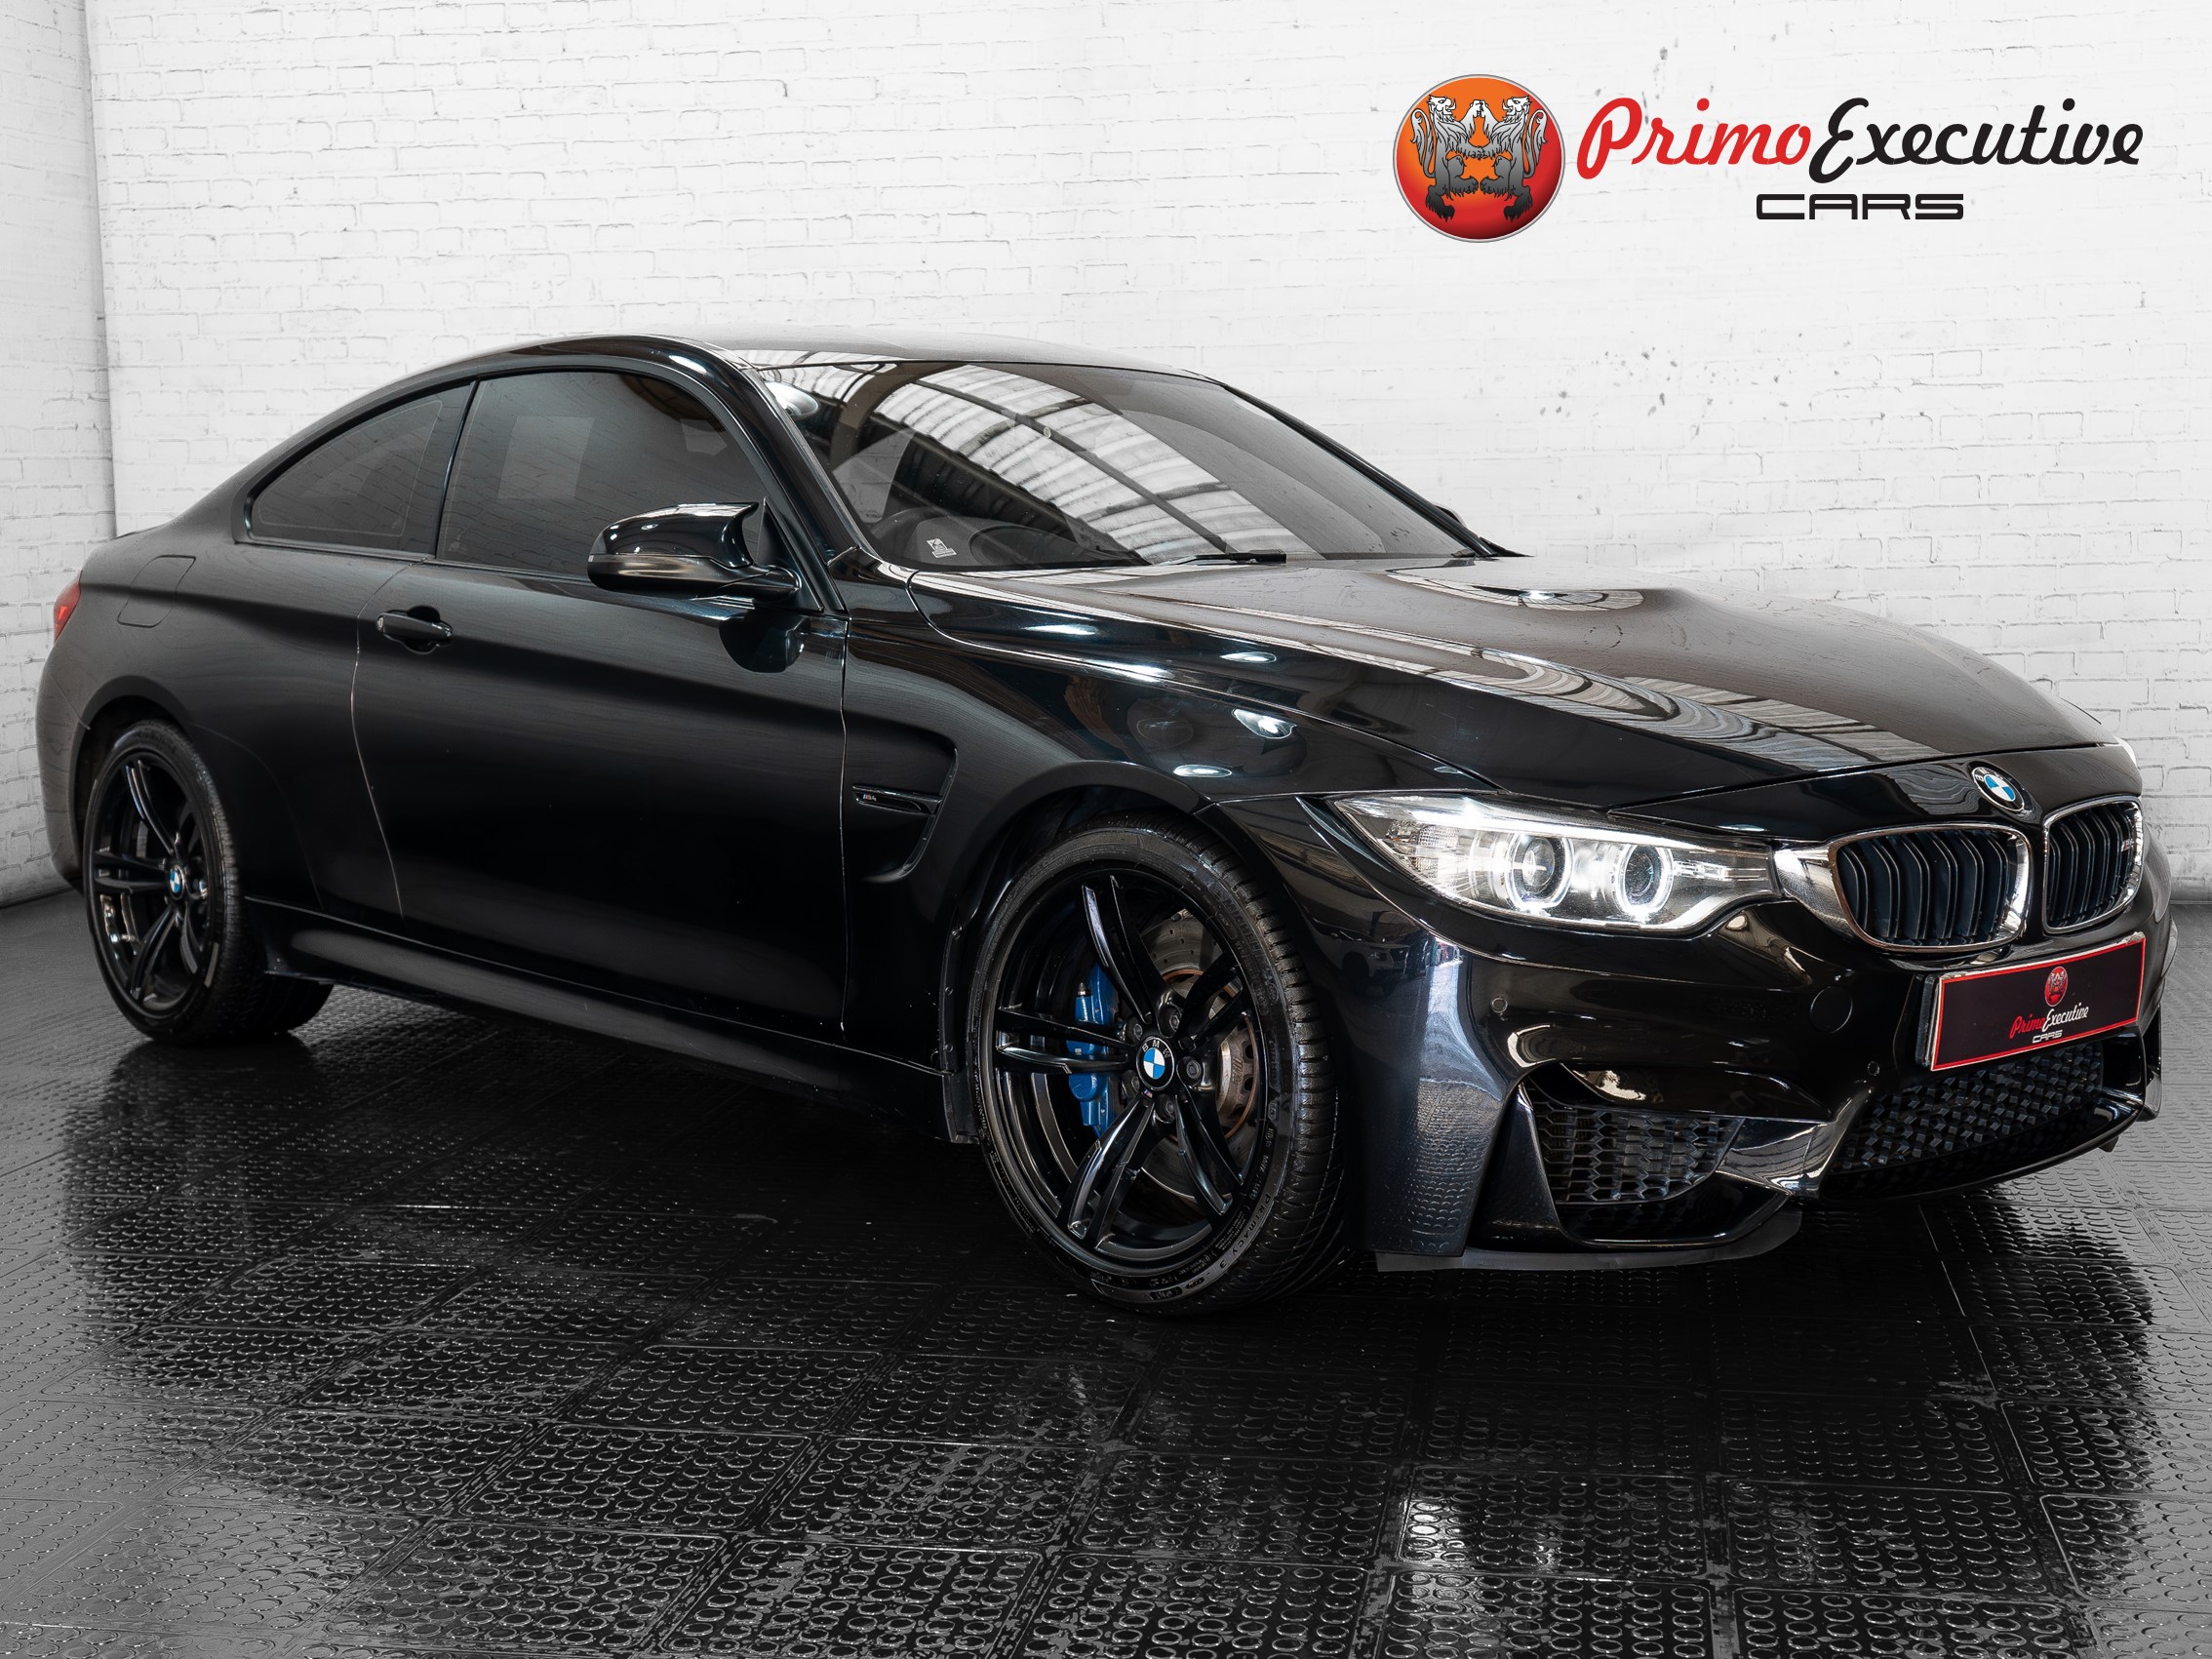 2015 BMW M4  for sale - 510533